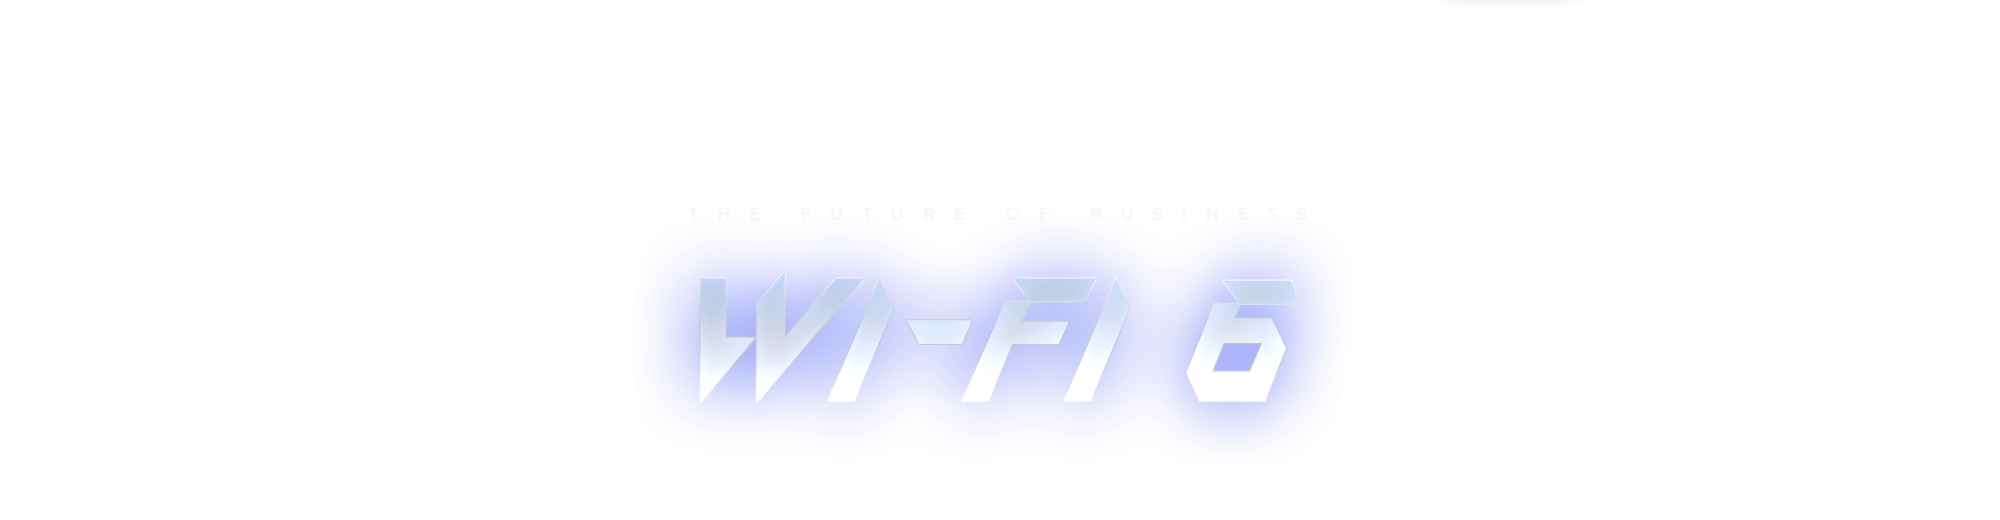 The future of business: Wi-Fi 6.